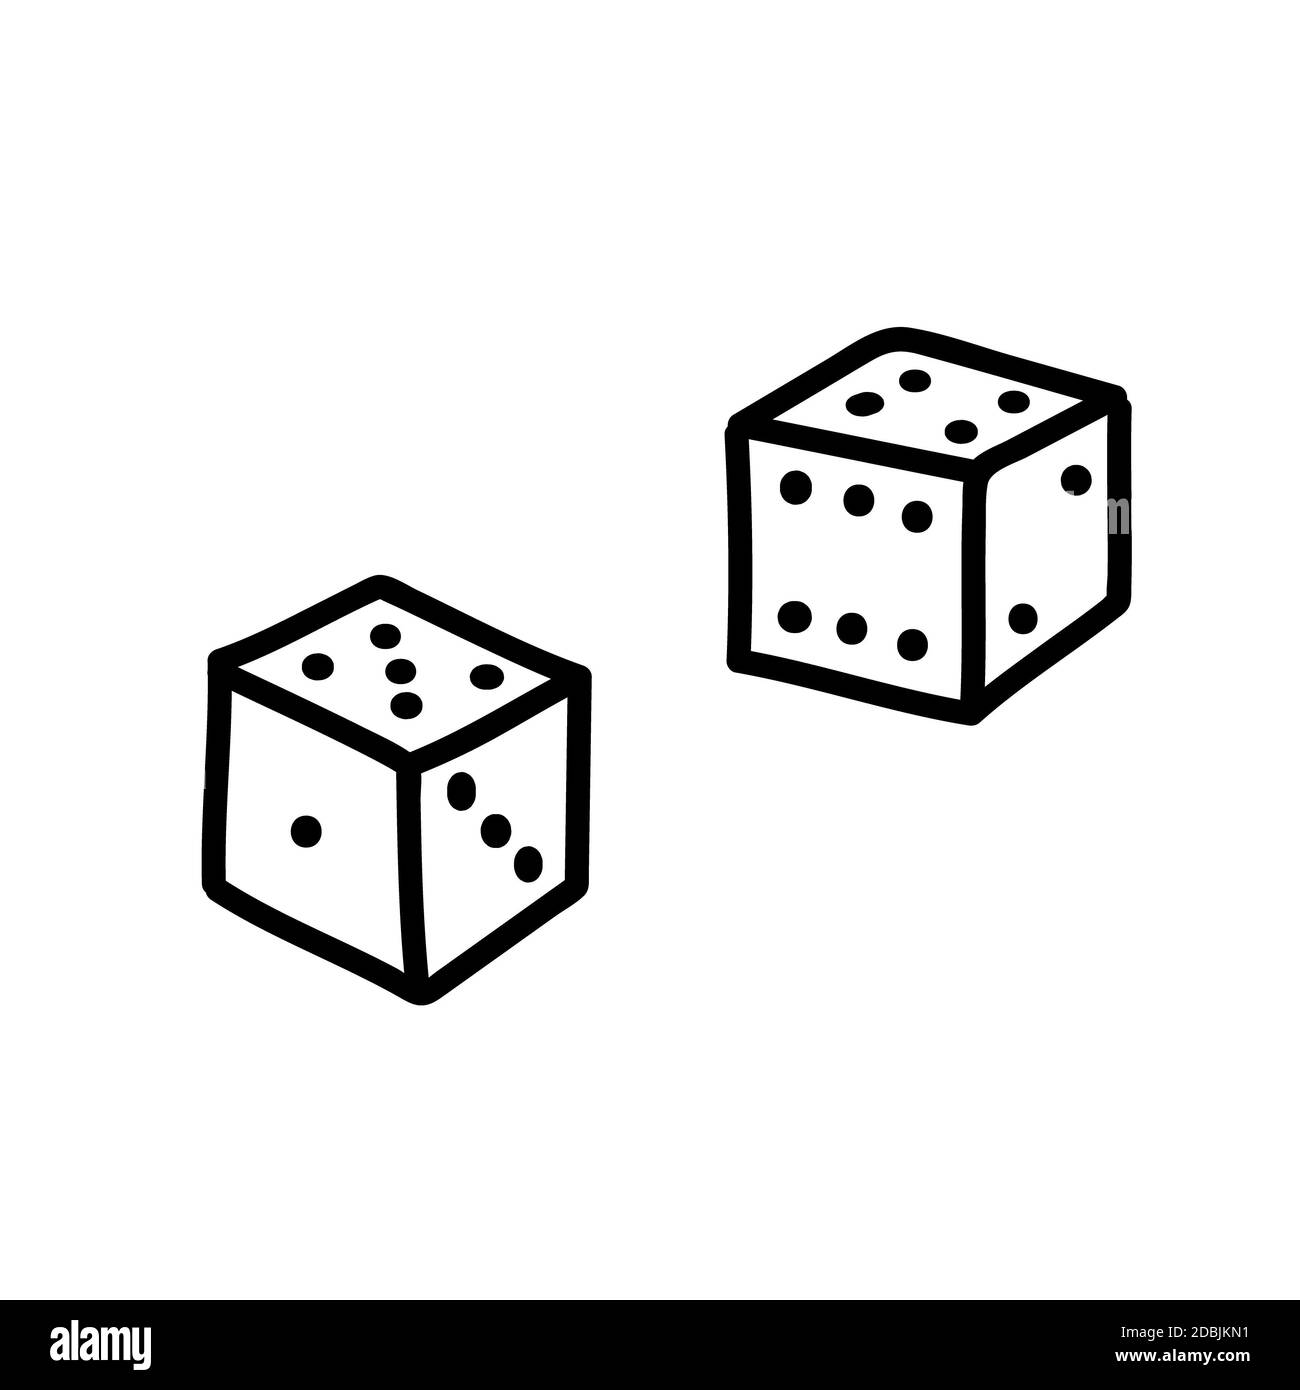 Vector illustration of dices icon. Two cube silhouettes hand drawn illustration. Ink pen sketch style. icon for your design, prints, wallpaper, web in Stock Photo